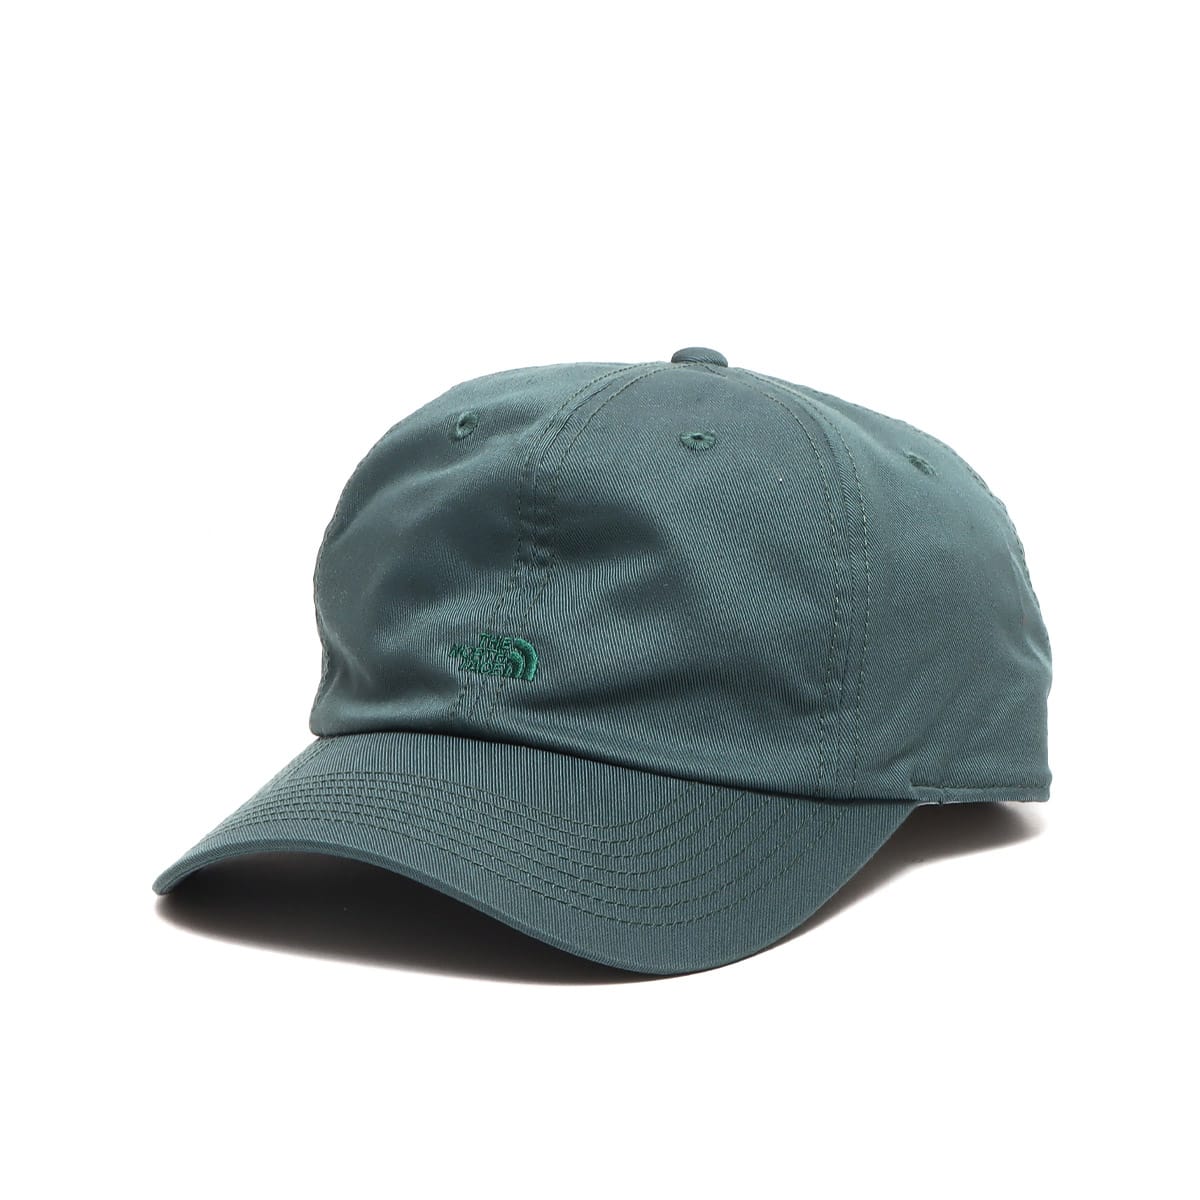 THE NORTH FACE PURPLE LABEL Stretch Twill Field Cap Vintage Green 